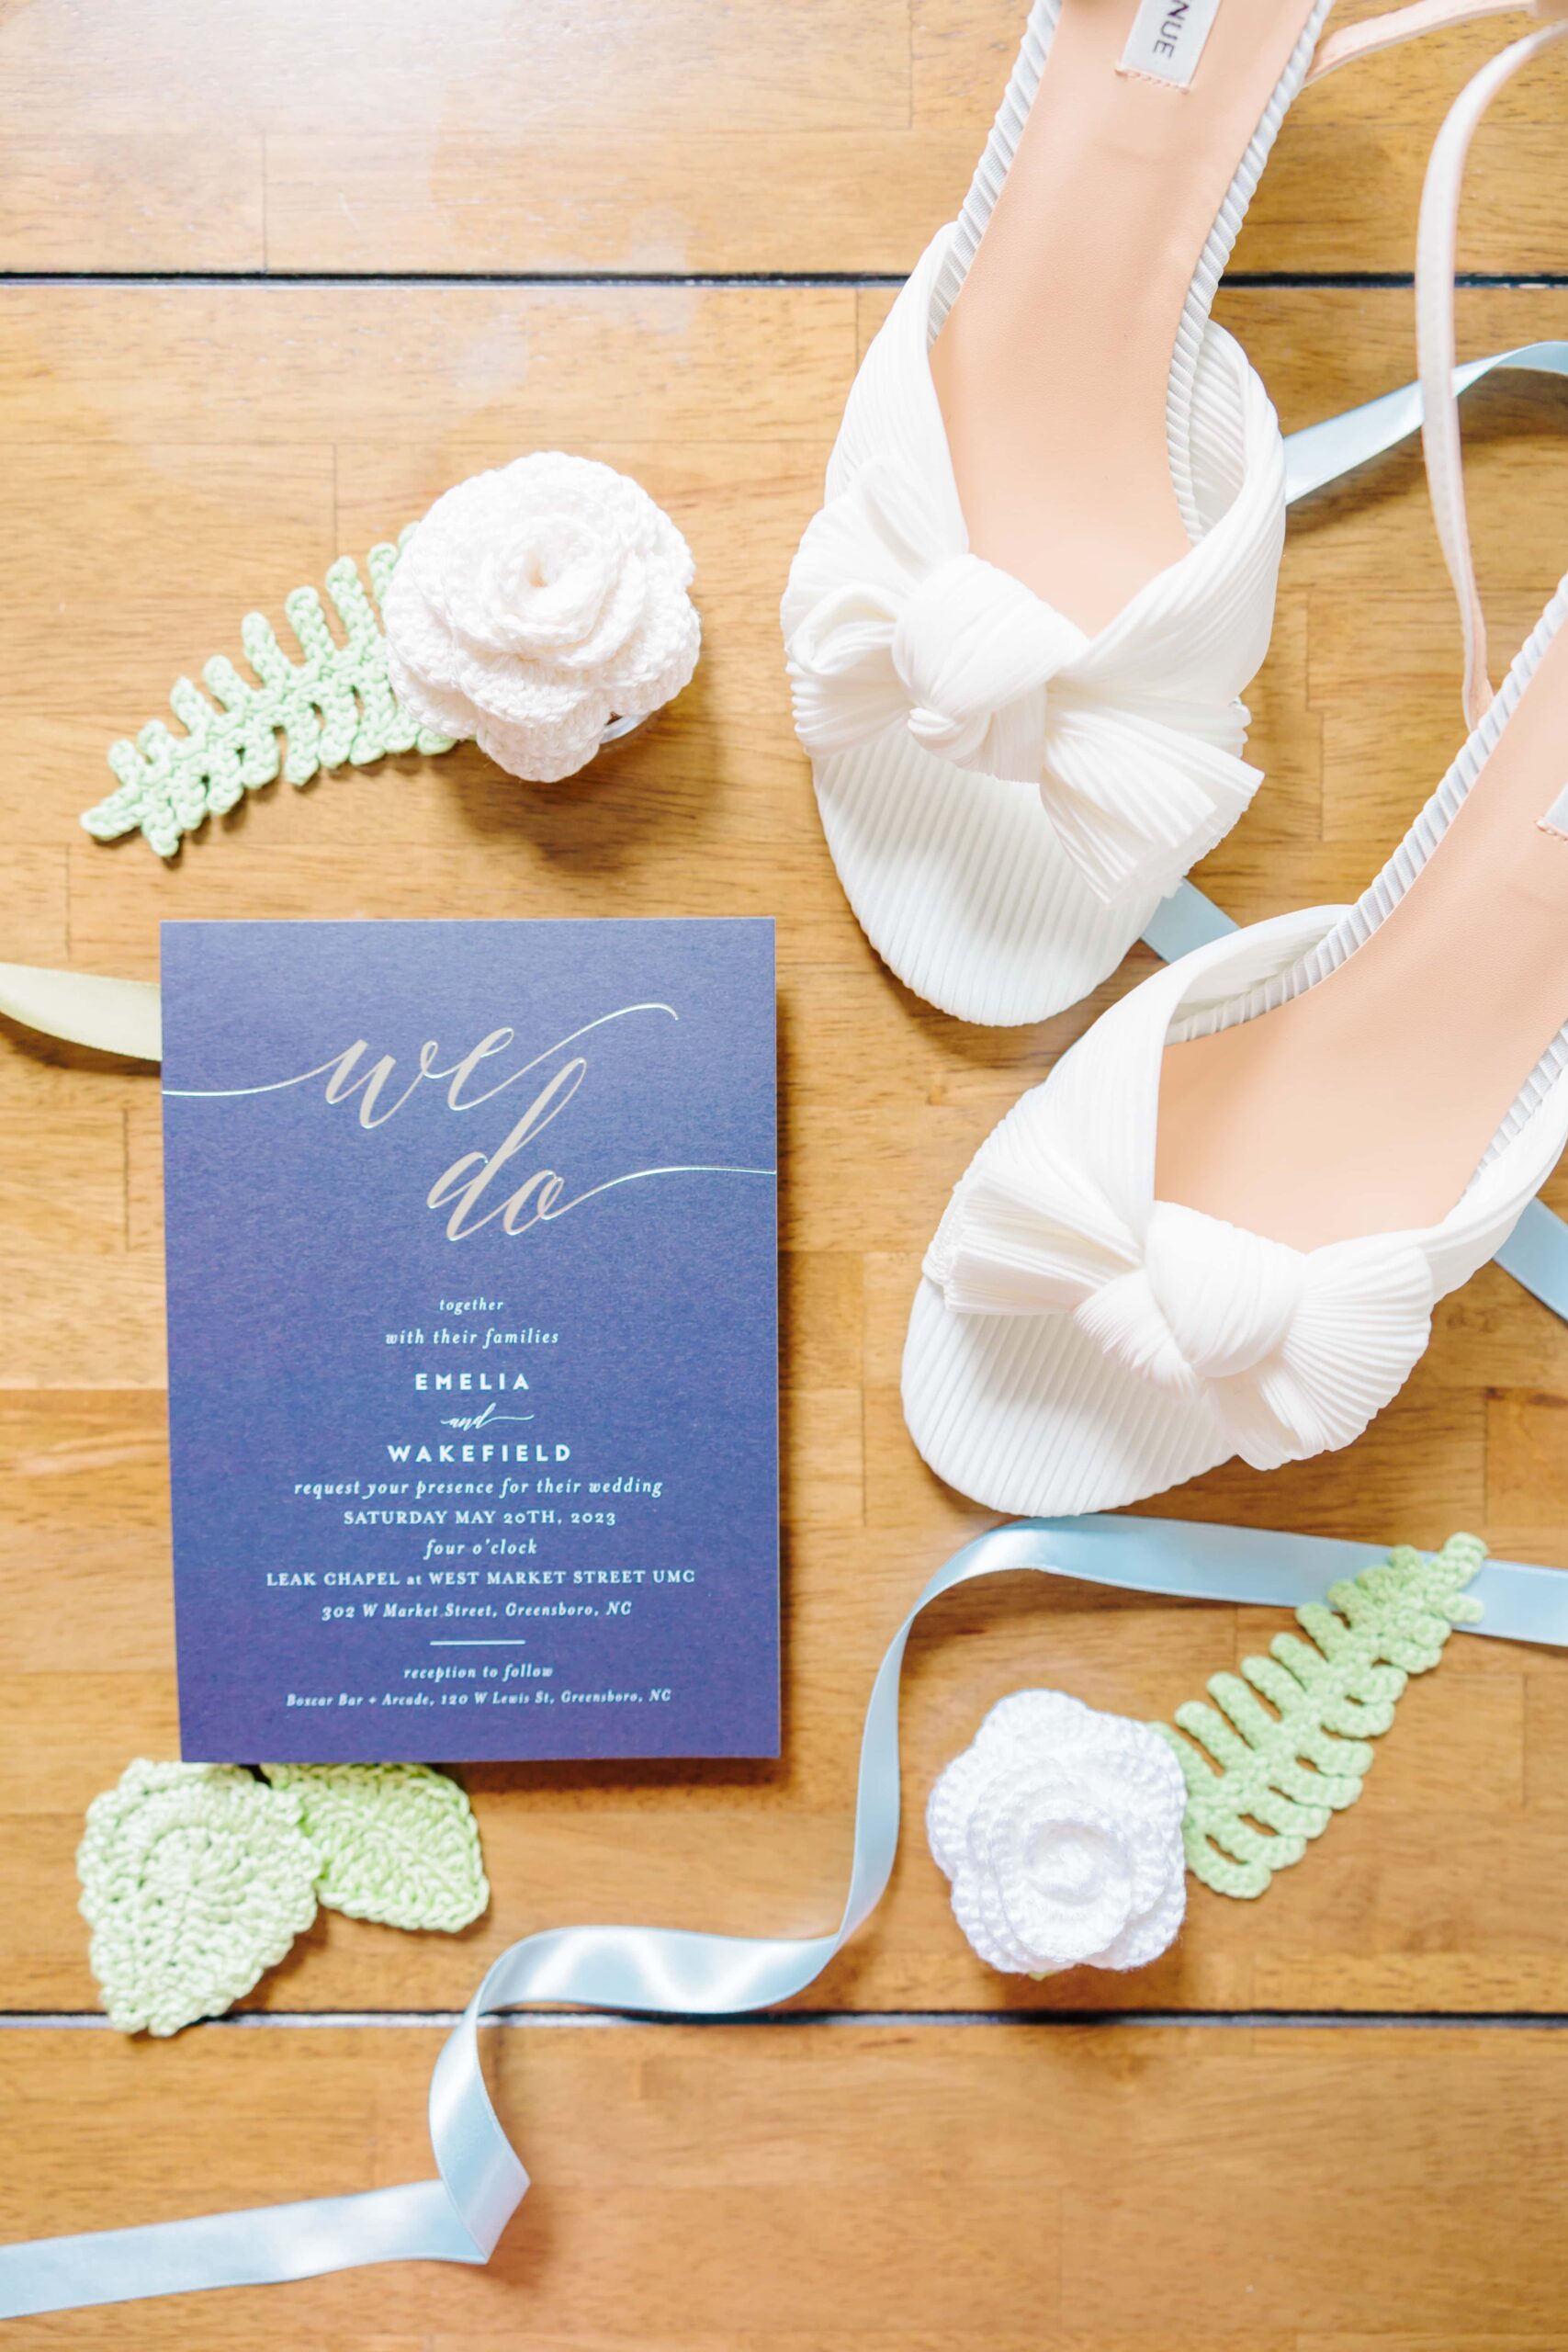 A dark blue wedding invitation inviting guests to this Greensboro wedding is placed amongst crocheted flowers, blue ribbon, and the bride's shoes.